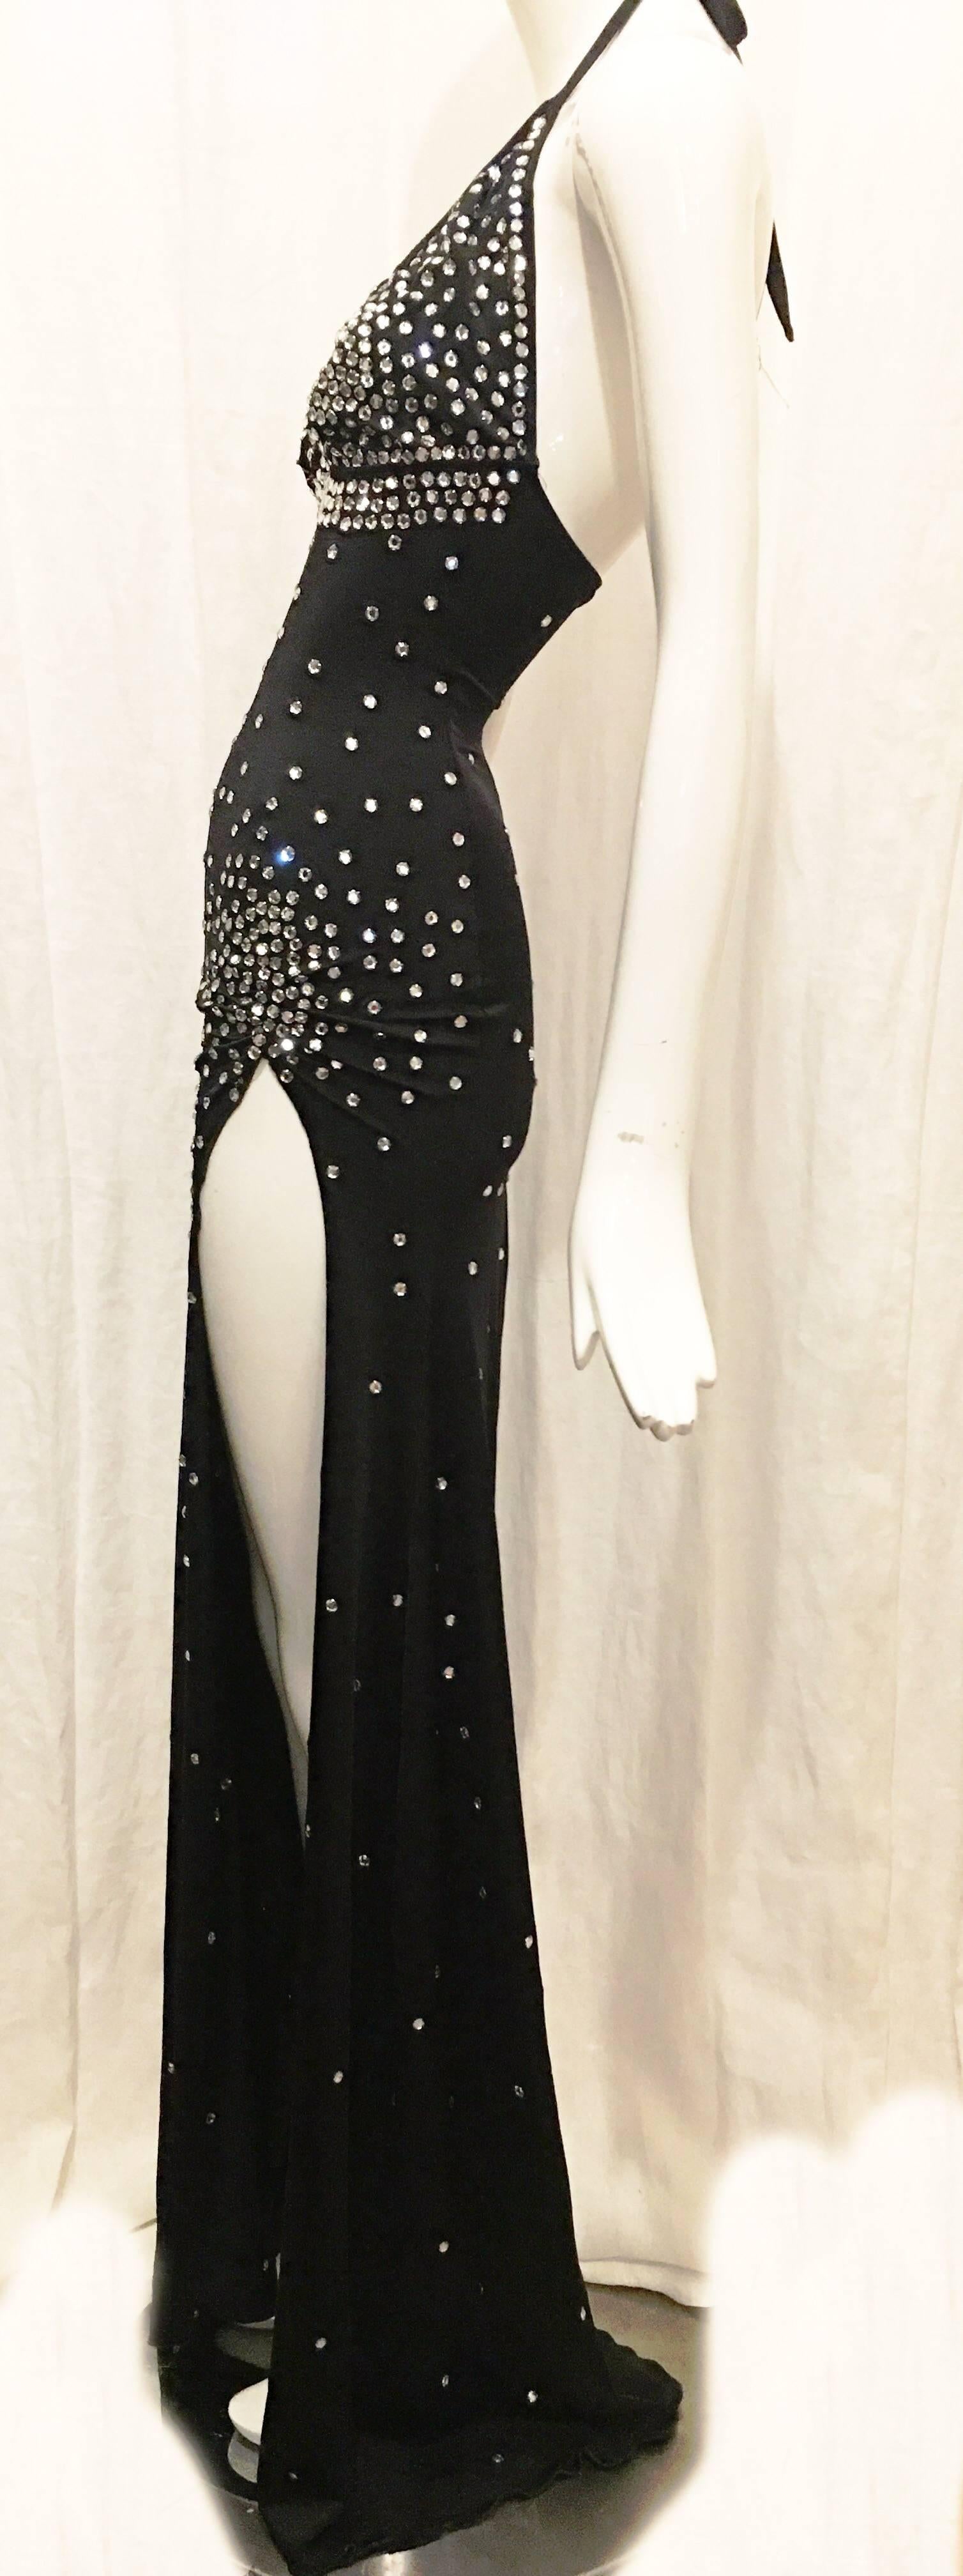 Full length black halter dress with all-over rhinestone embellishment. Concentration of rhinestones around bust and at left hip with more scattered rhinestones throughout. 43 inch slit at left hip adds an extra sexy touch to this form fitting eye